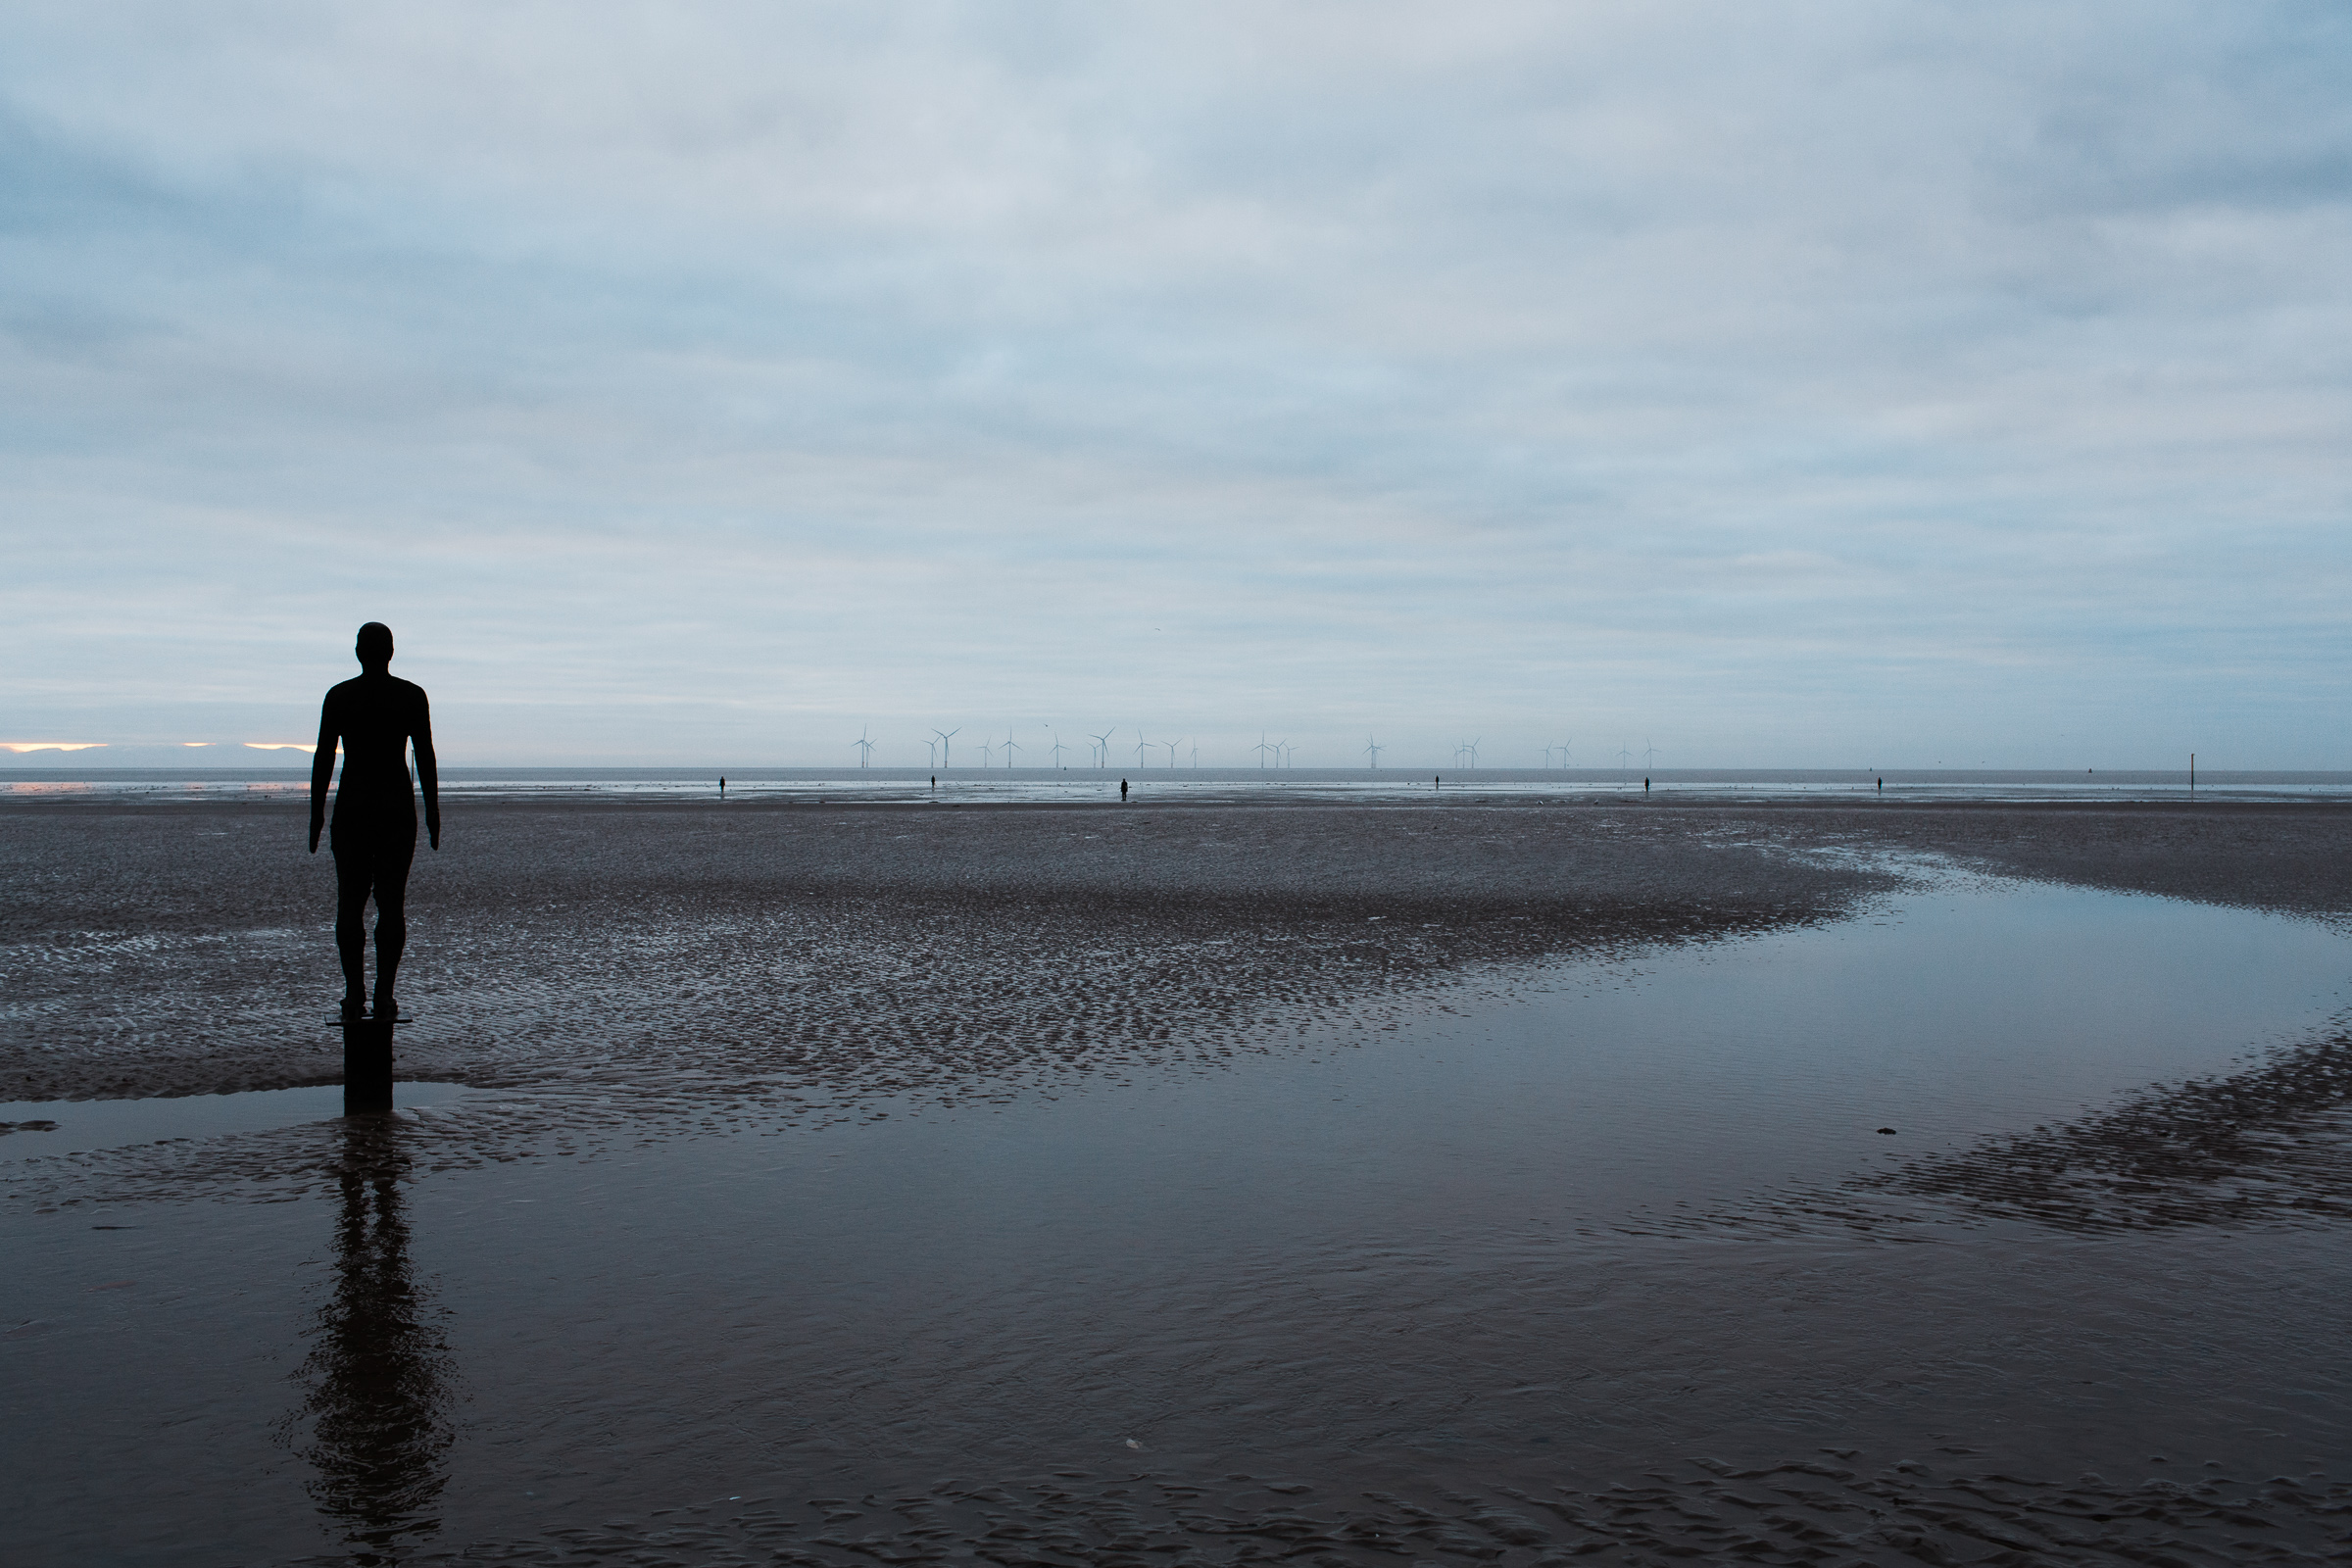 Crosby beach showing Antony Gormley's Another Place cast iron figures and a wind farm